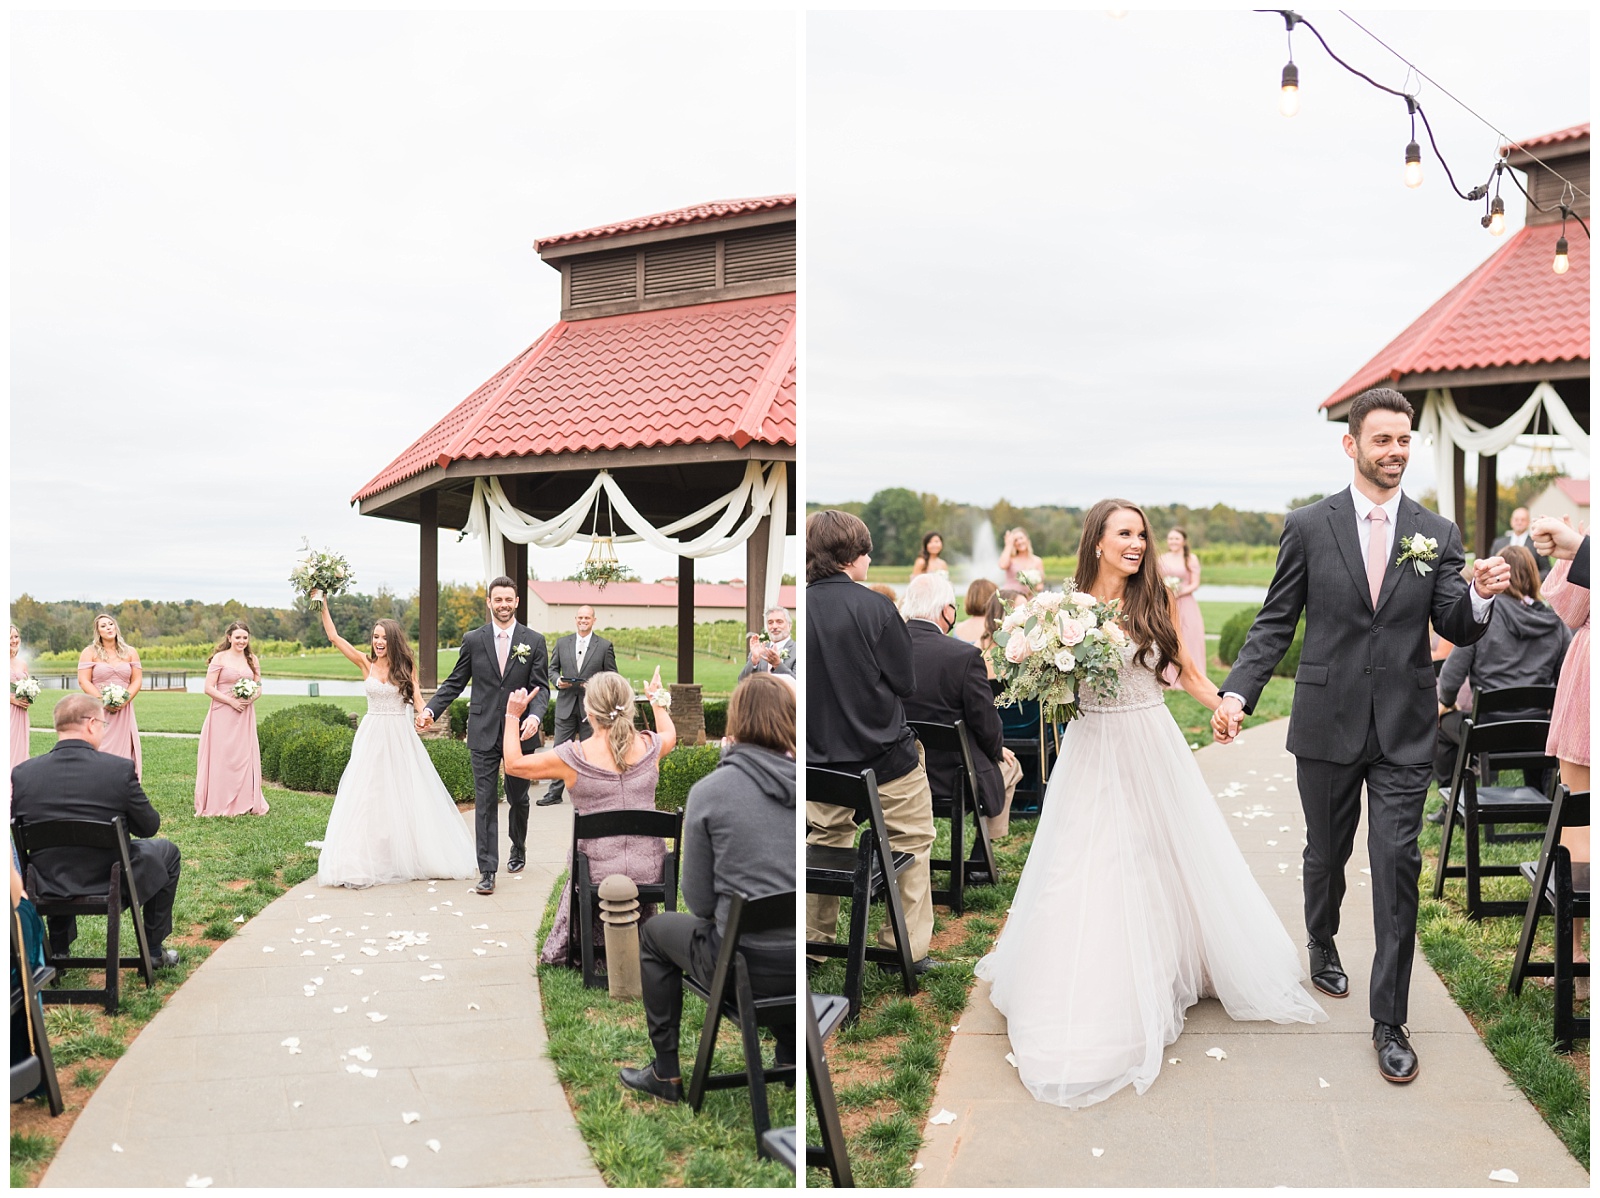 bride and groom recessional after getting married at the Childress Vineyards Wedding venue. Photo taken by jenn eddine photography, a greensboro north carolina wedding photographer